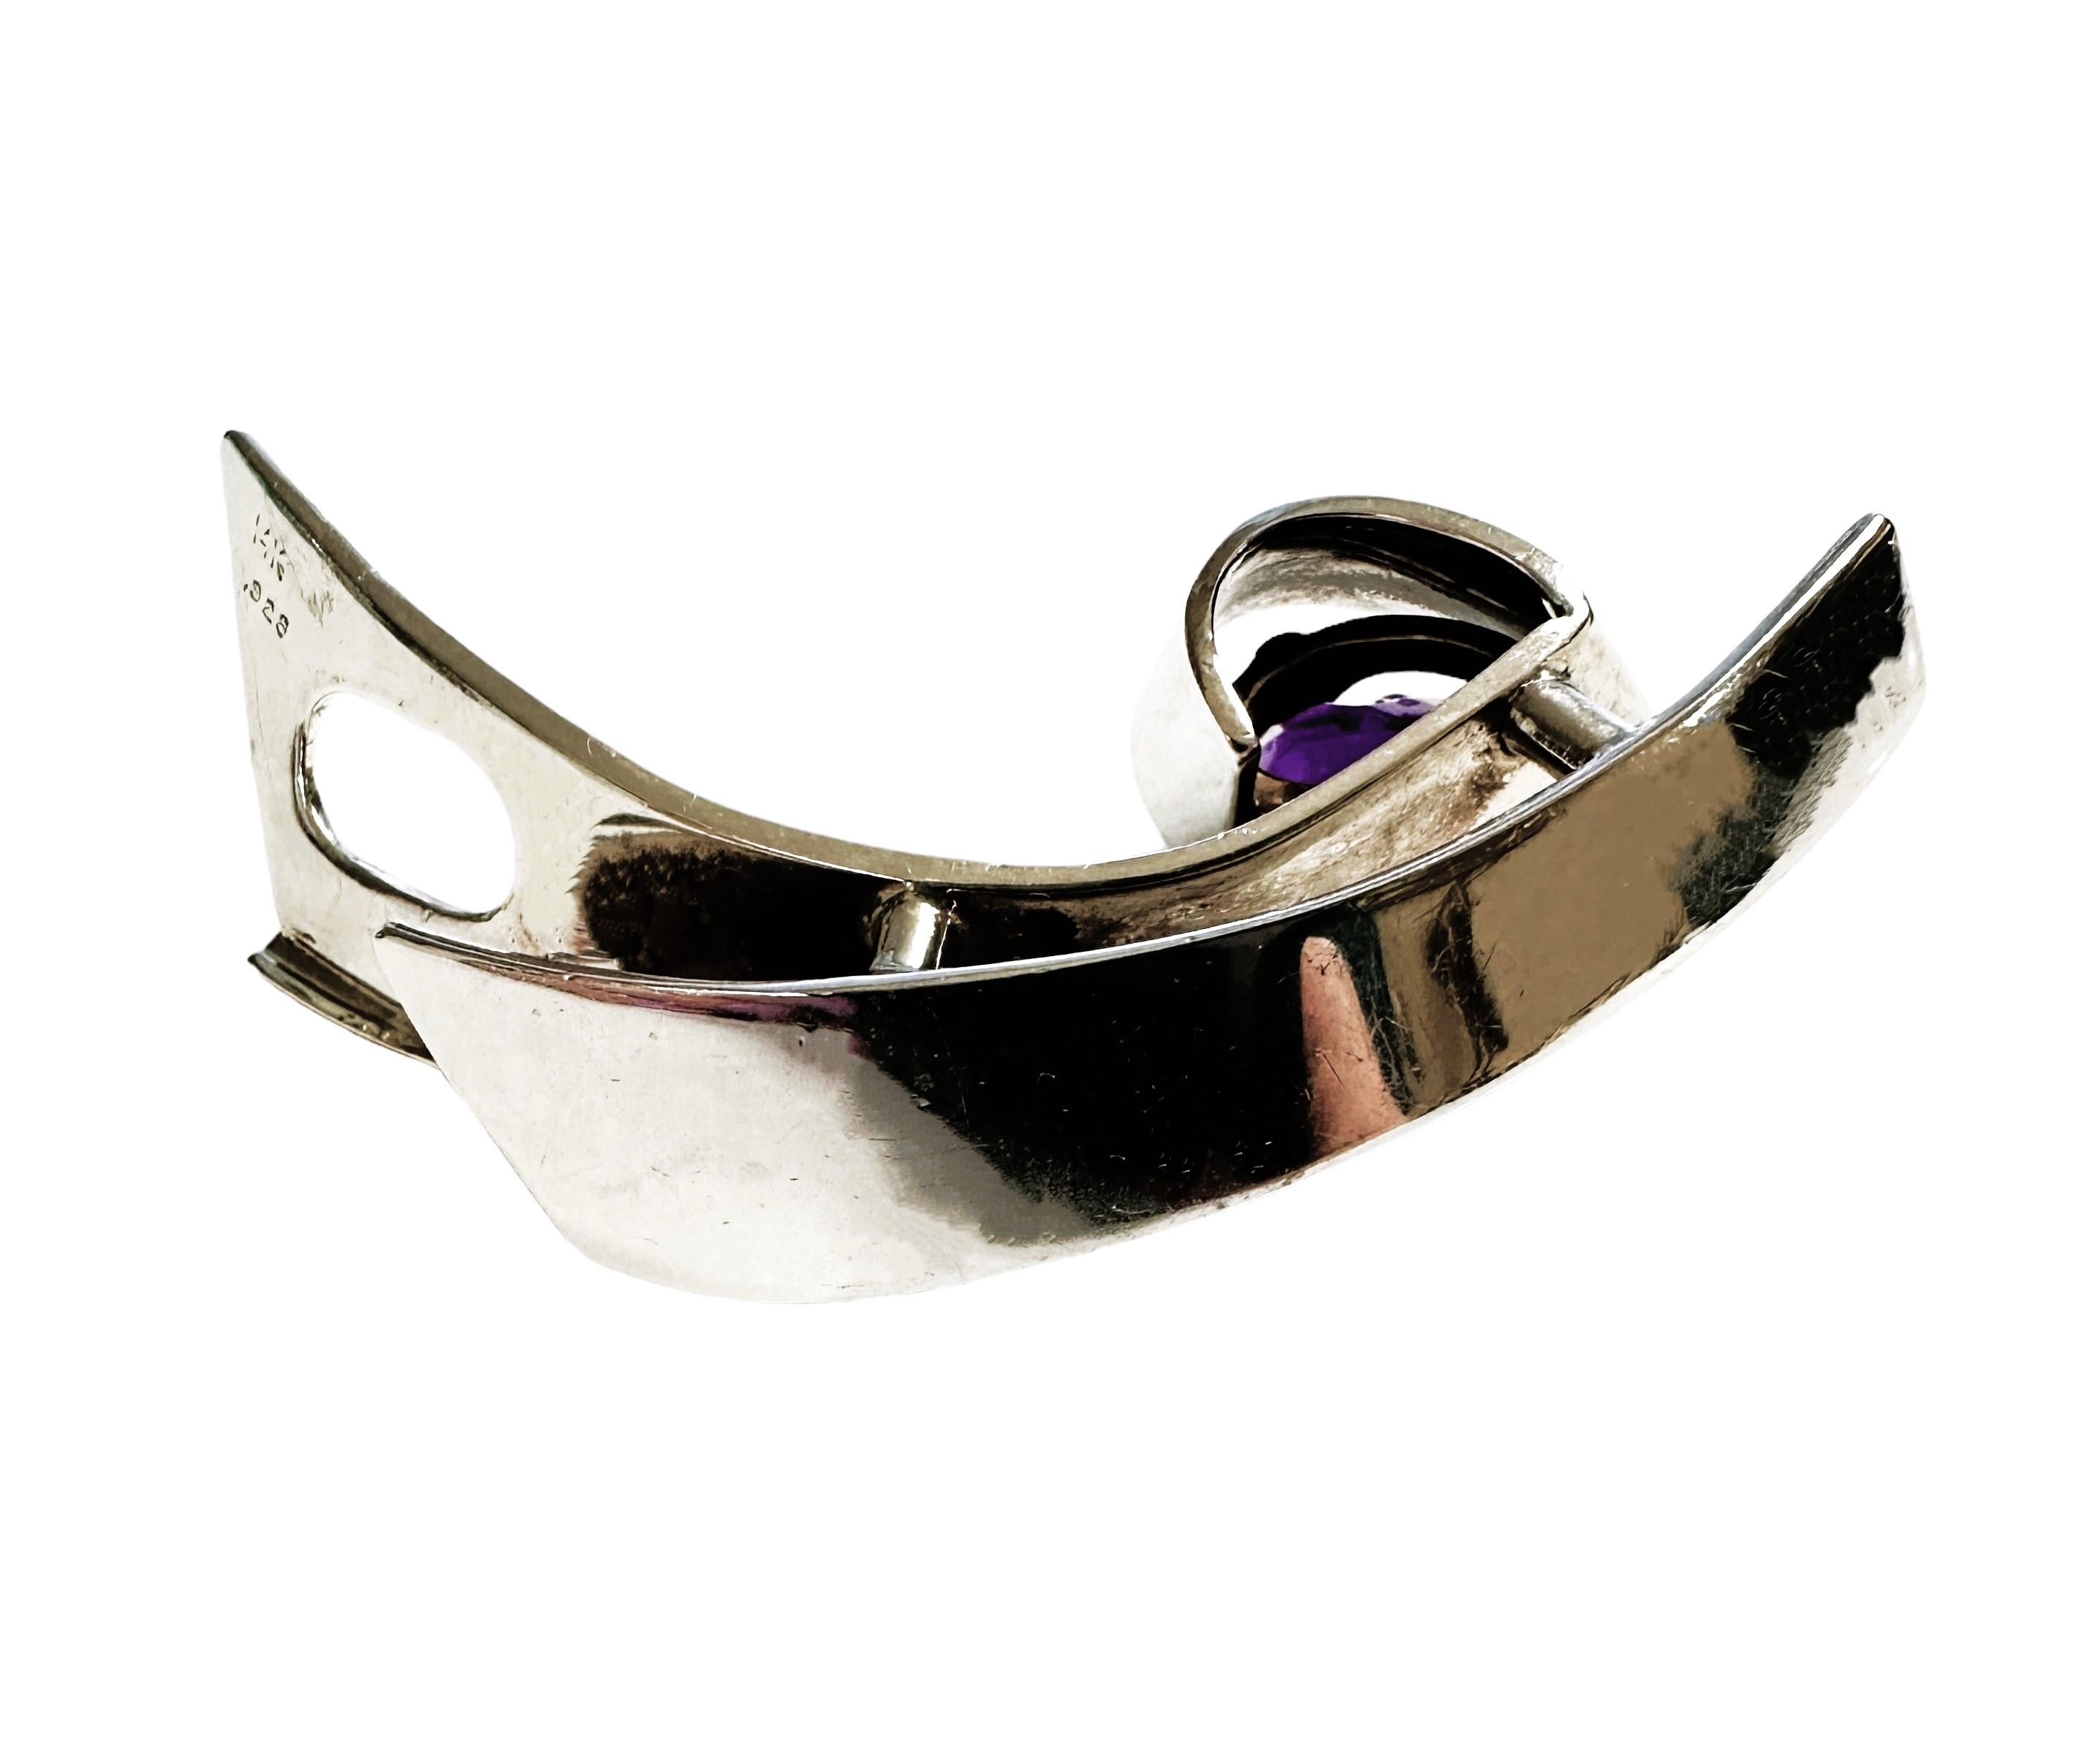 Women's 14k Gold & Sterling Silver Modernist Pendant with Purple Spinel For Sale